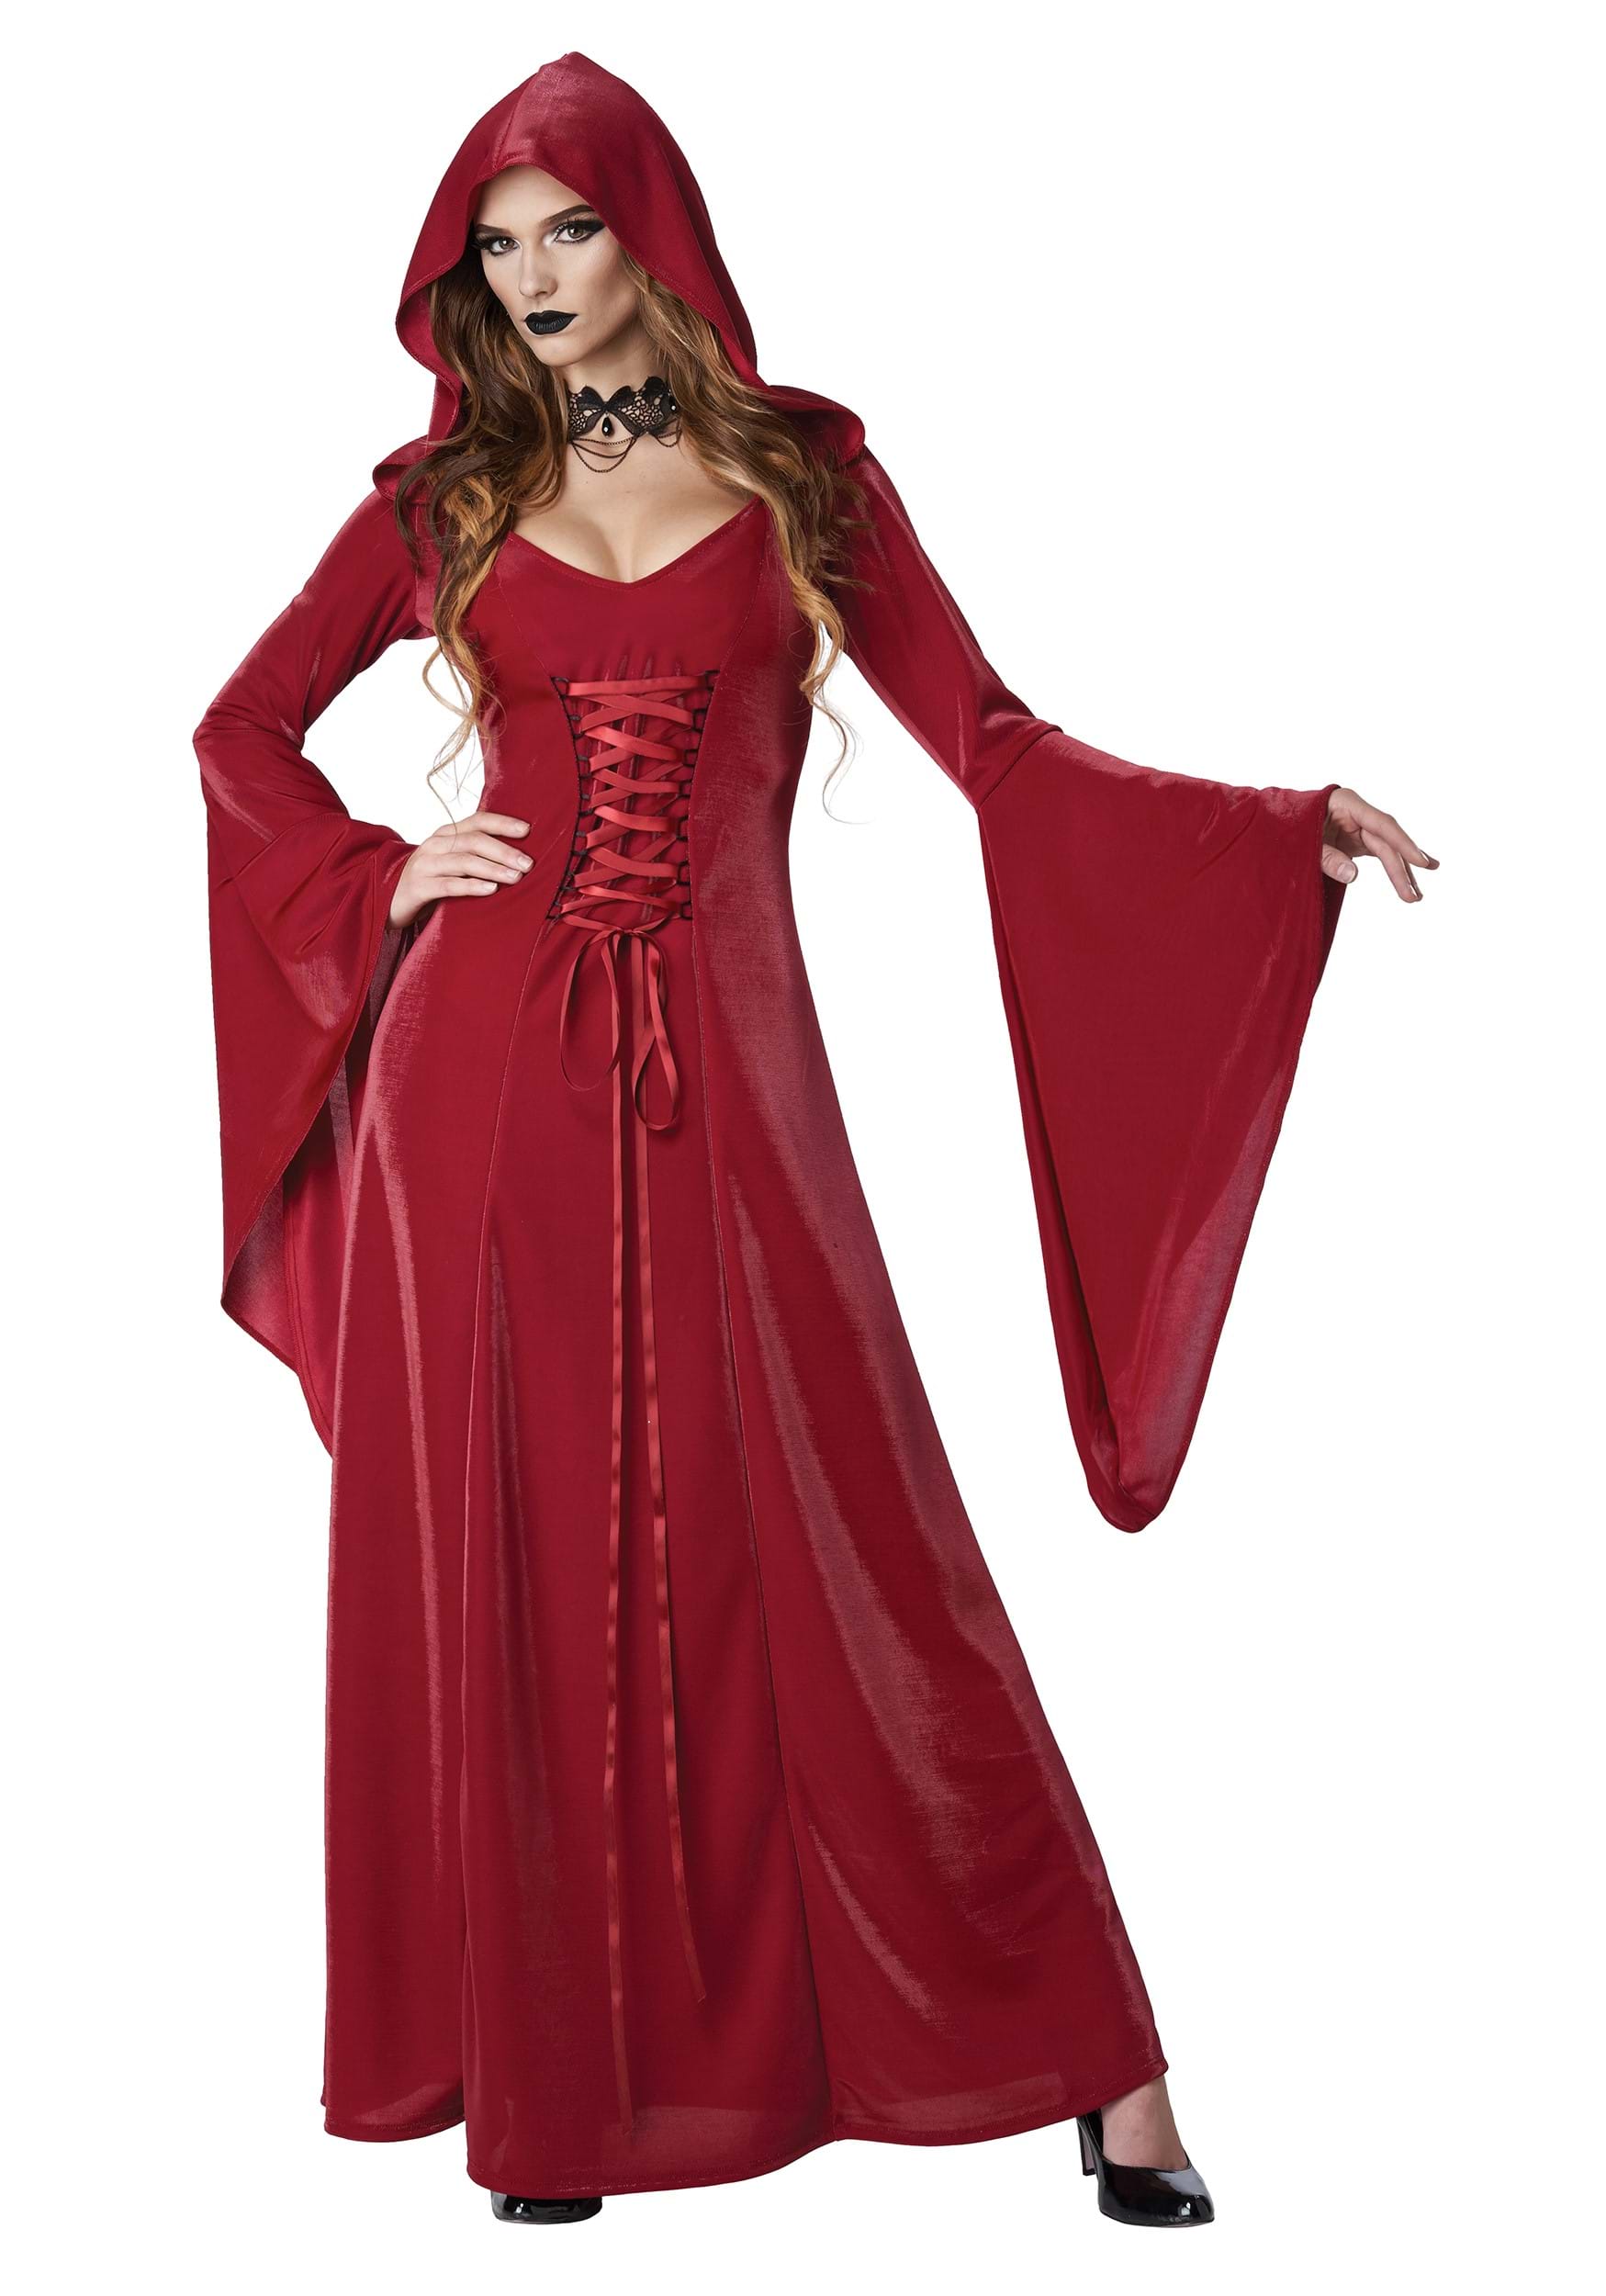 Photos - Fancy Dress California Costume Collection Crimson Robe Adult Costume for Women Red CA5 